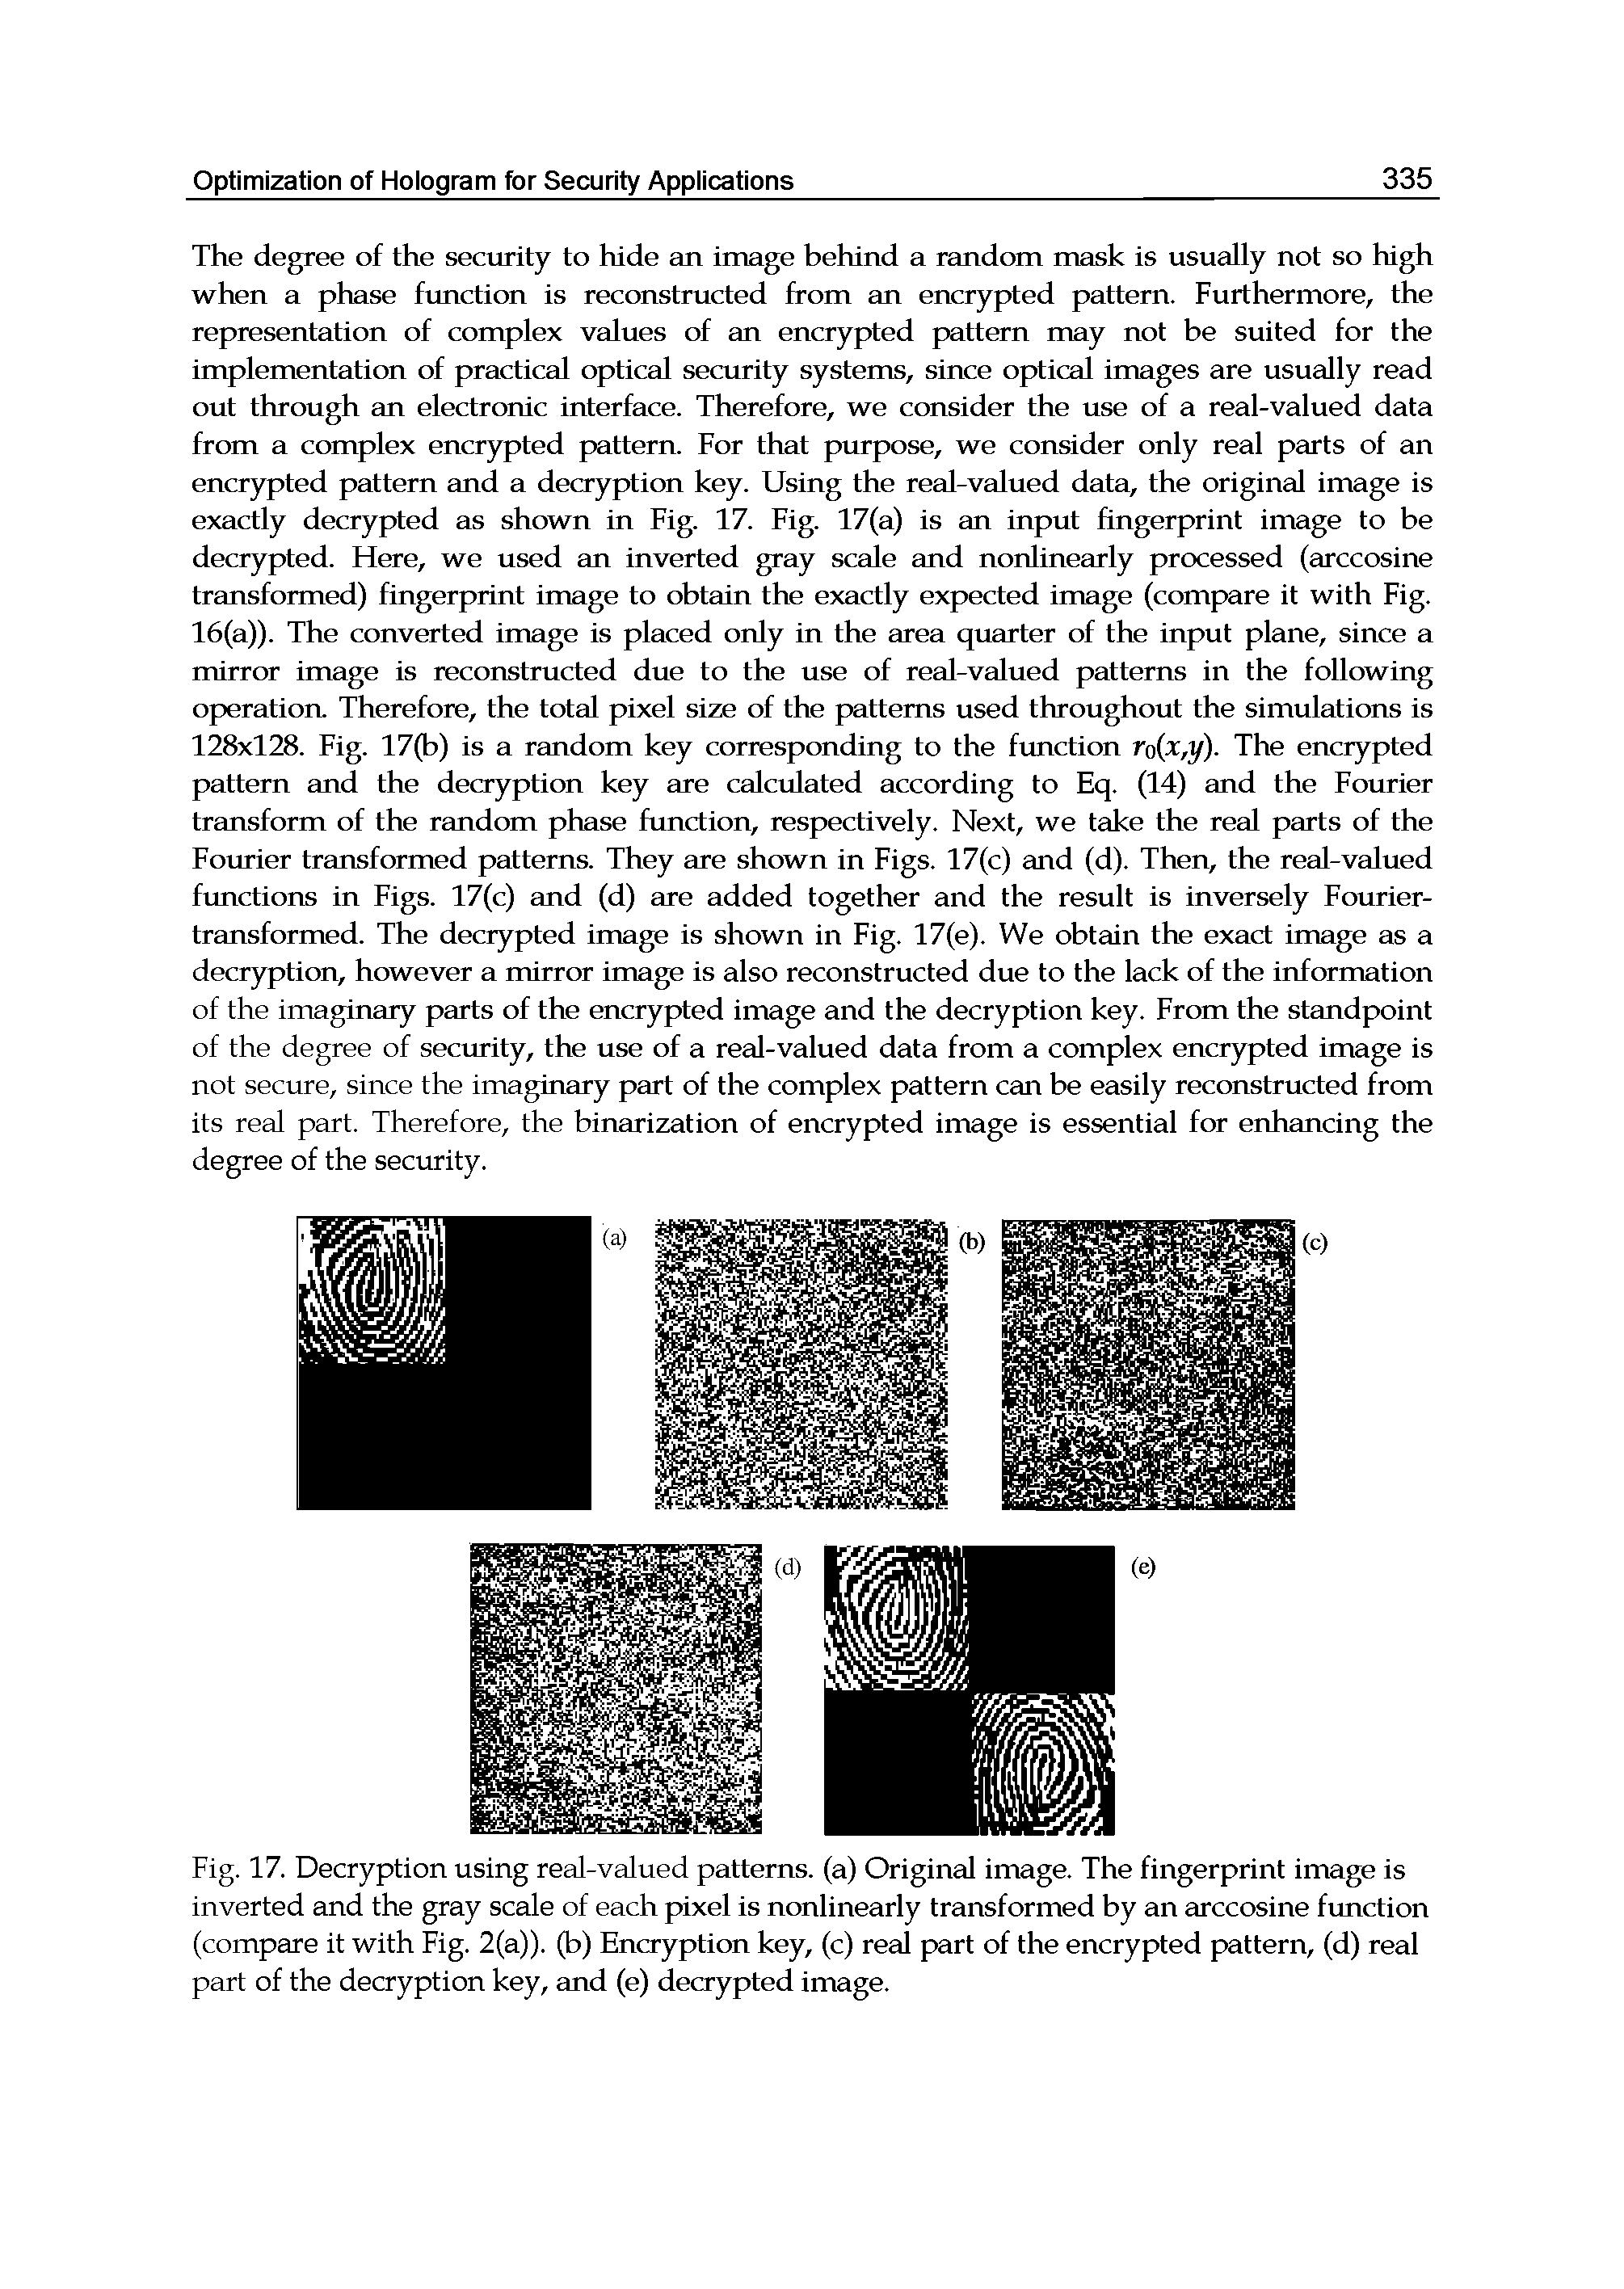 Fig. 17. Decryption using real-valued patterns, (a) Original image. The fingerprint image is inverted and the gray scale of each pixel is nonlinearly transformed by an arccosine function (compare it with Fig. 2(a)). (b) Encryption key, (c) real part of the encrypted pattern, (d) real part of the decryption key, and (e) decrypted image.